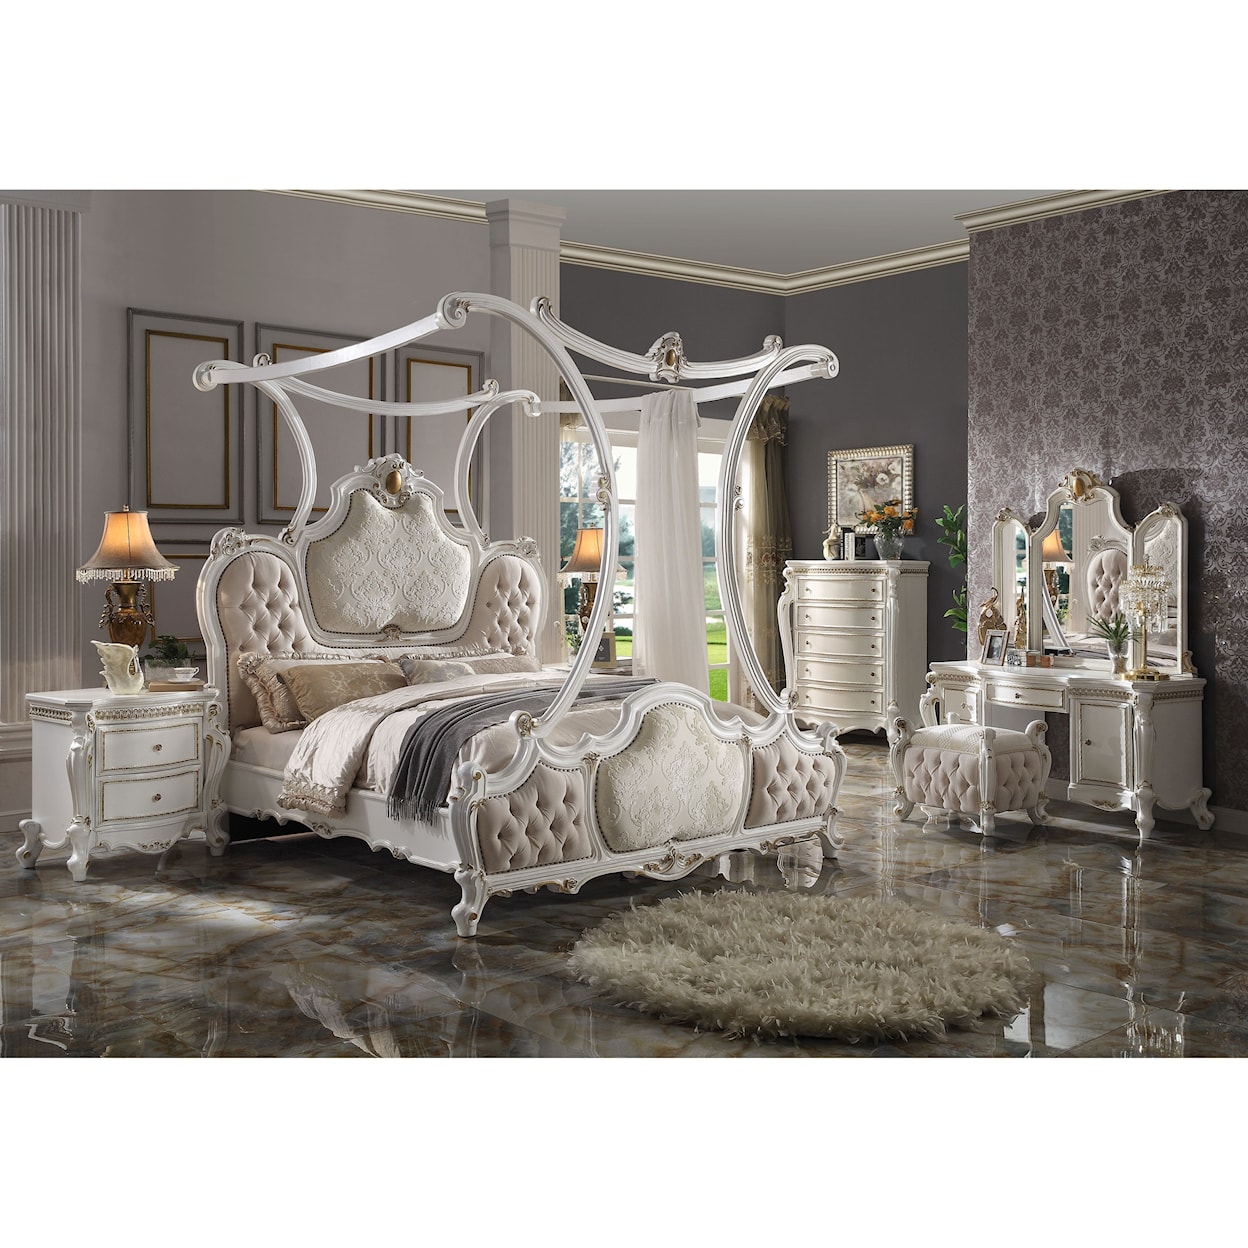 Acme Furniture Picardy California King Bed (Canopy)